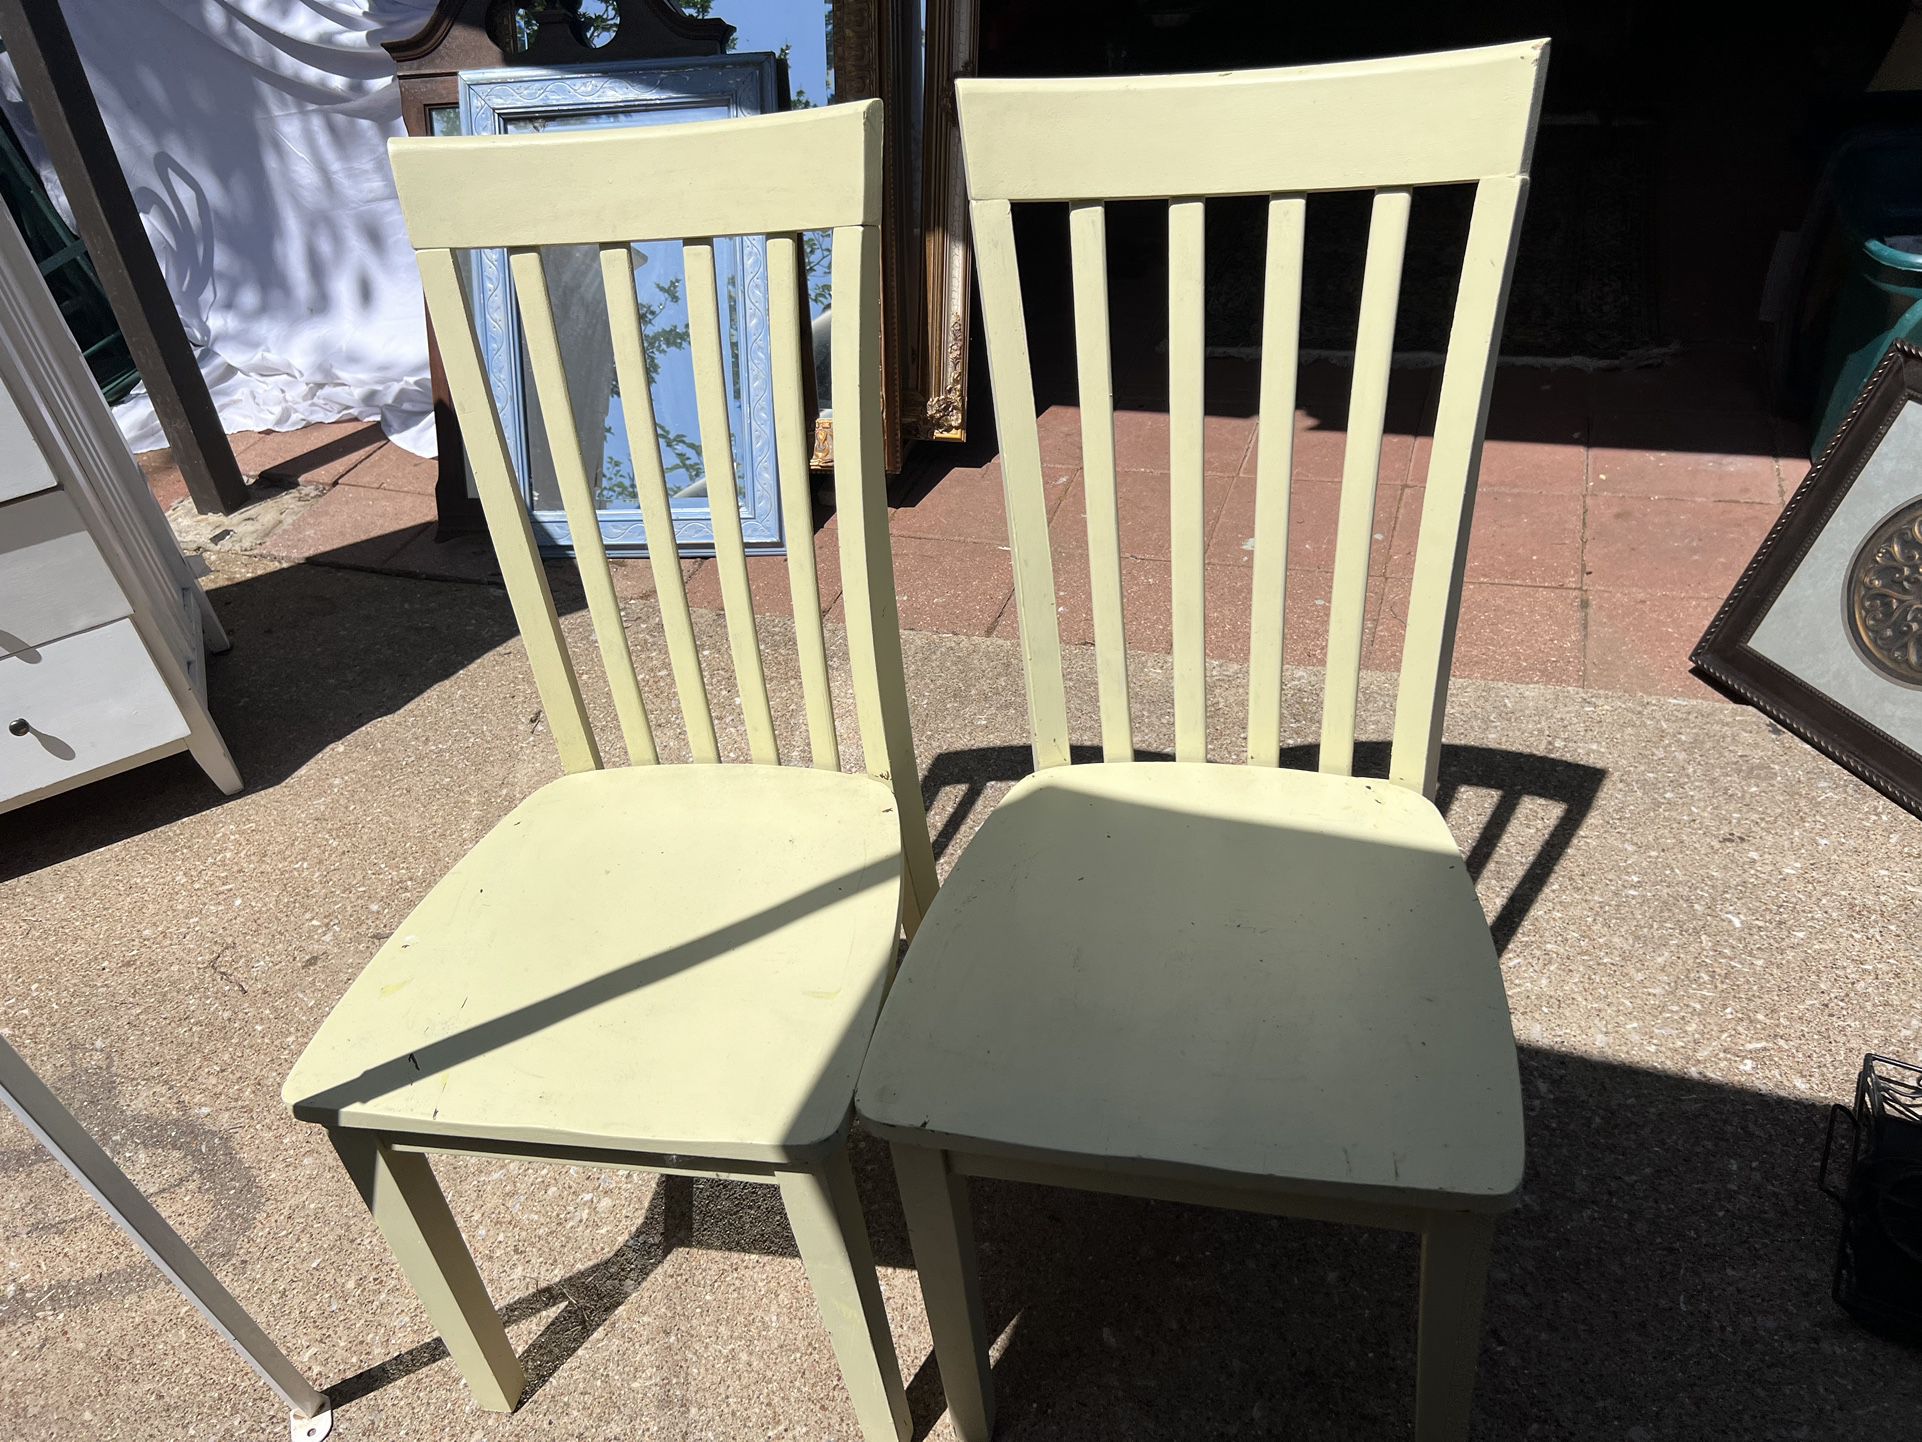 Set up two wooden chairs, soft green, sage, pastel shabby chic great condition. Smoke free home.